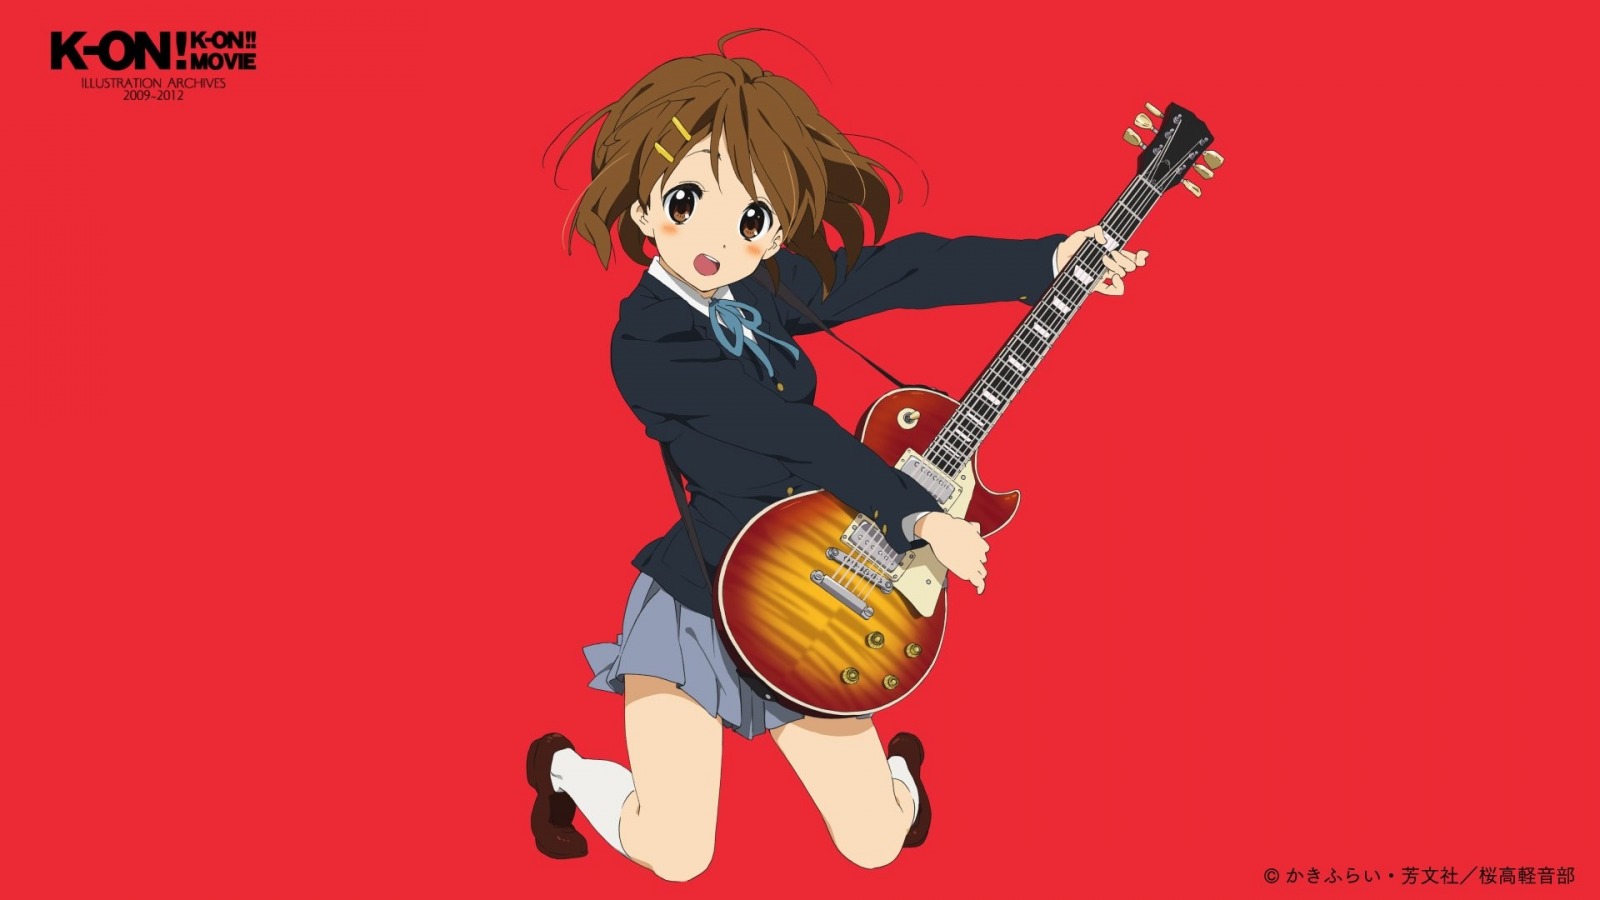 K-ON! IILUSTRATION ARCHIEVES 2009-2012 P.1 [P1]